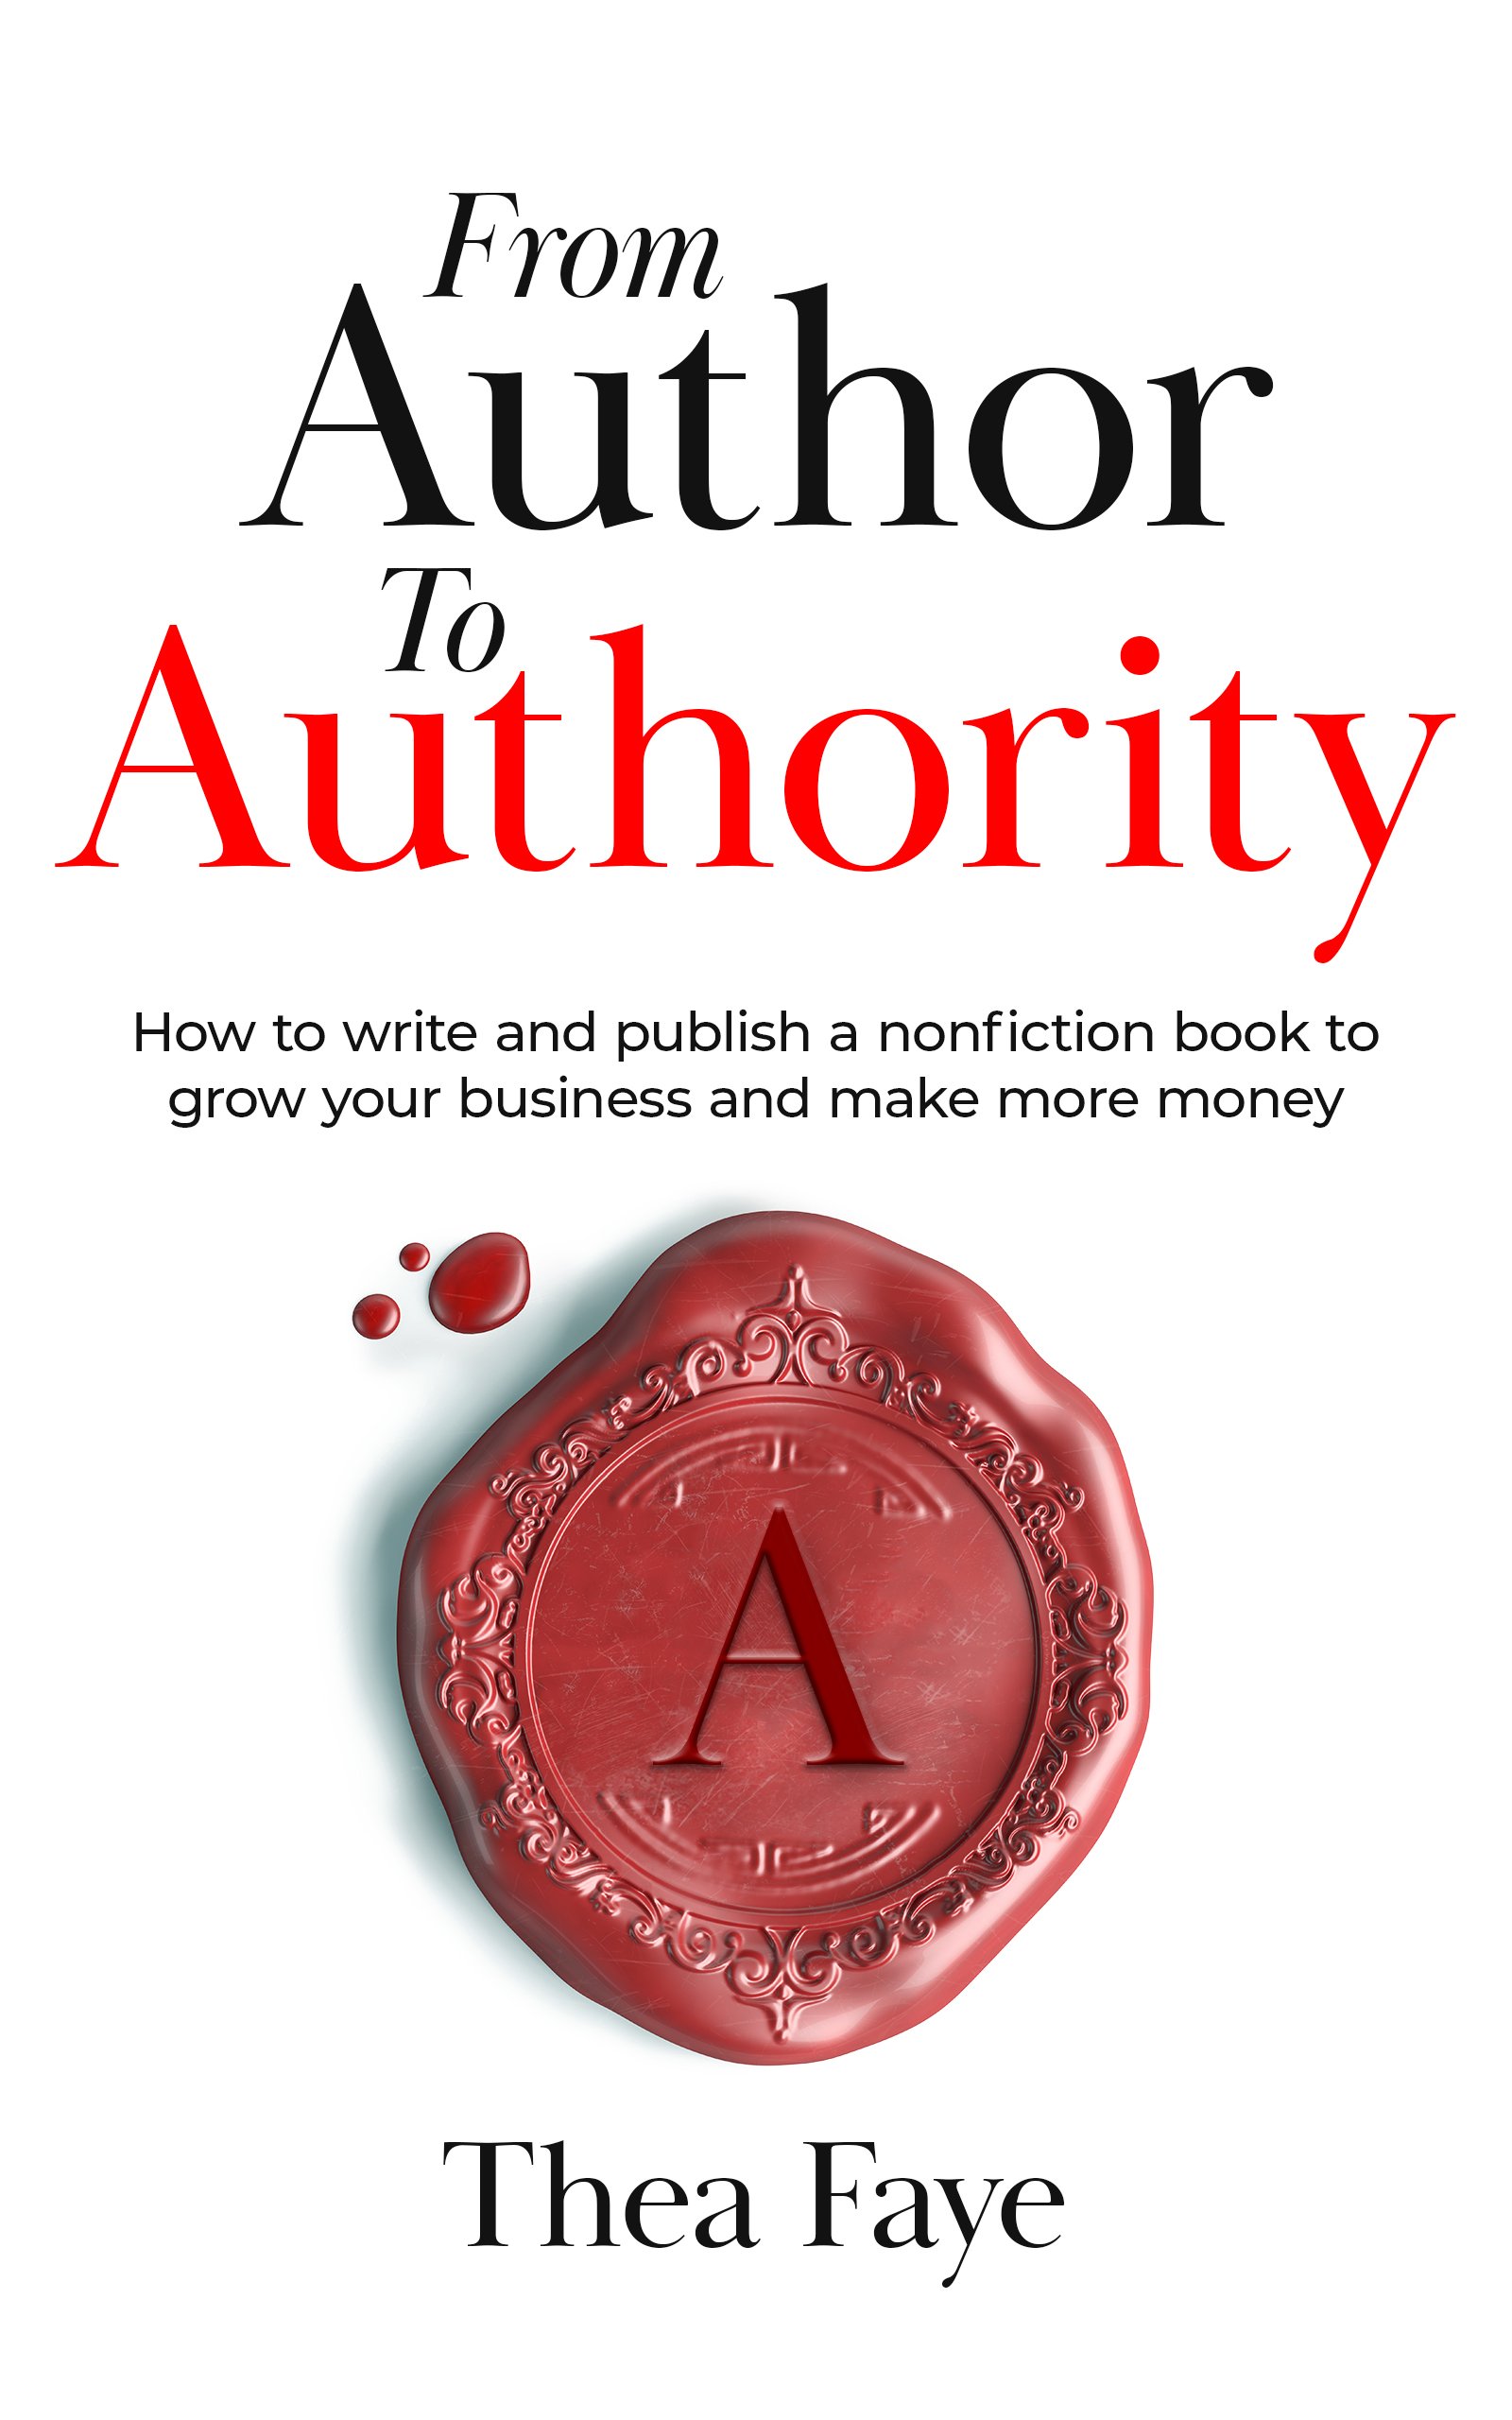 How to Publish Your Book on Amazon